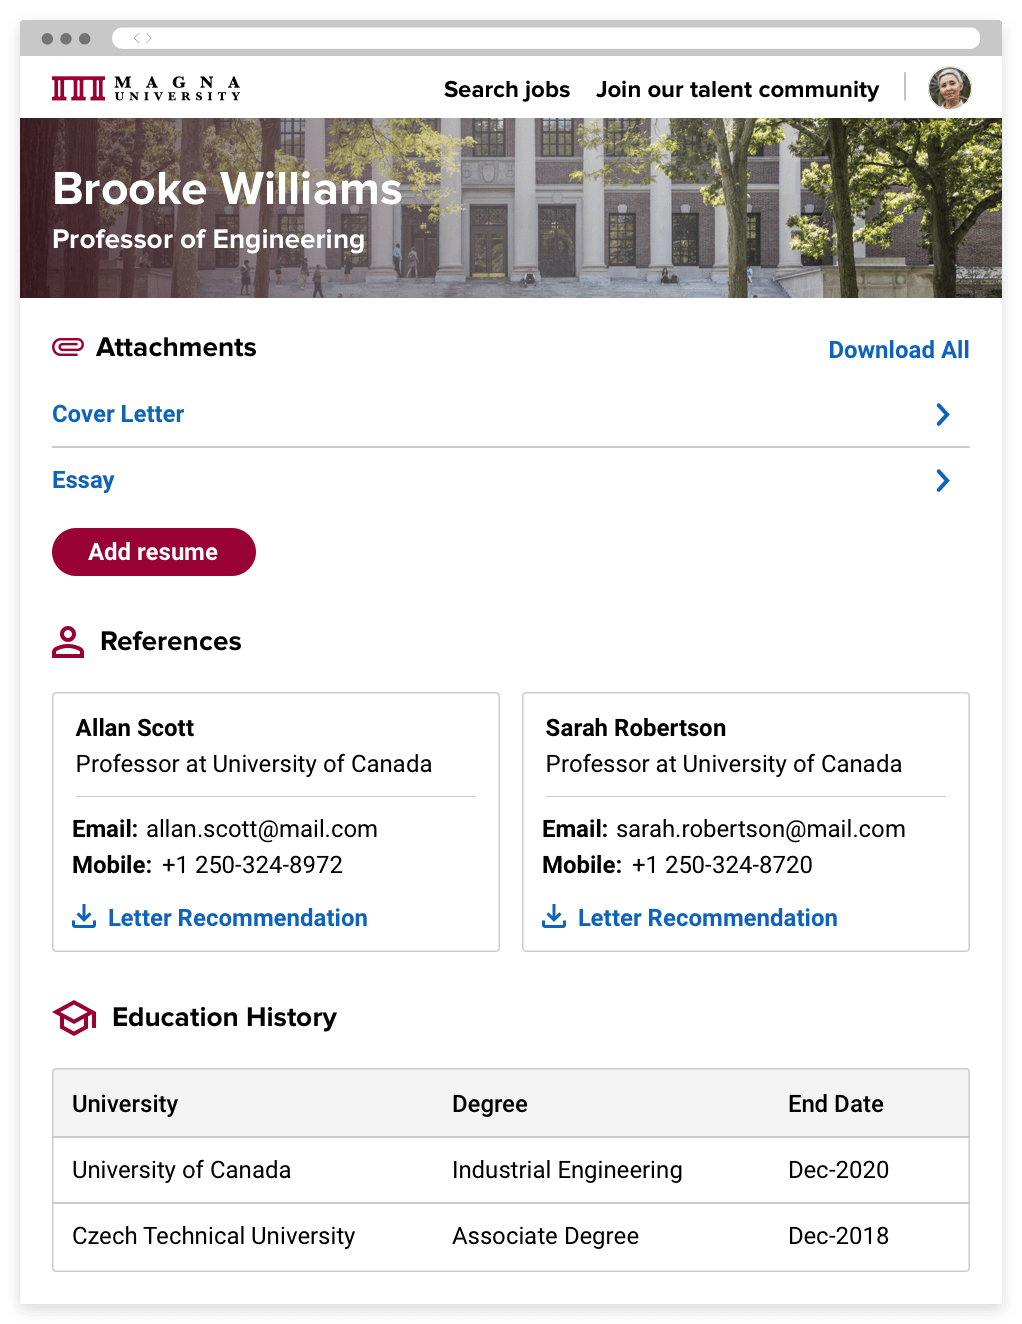 An applicant's profile showing her attached files and education, and a feedback form with the option to request an interview.